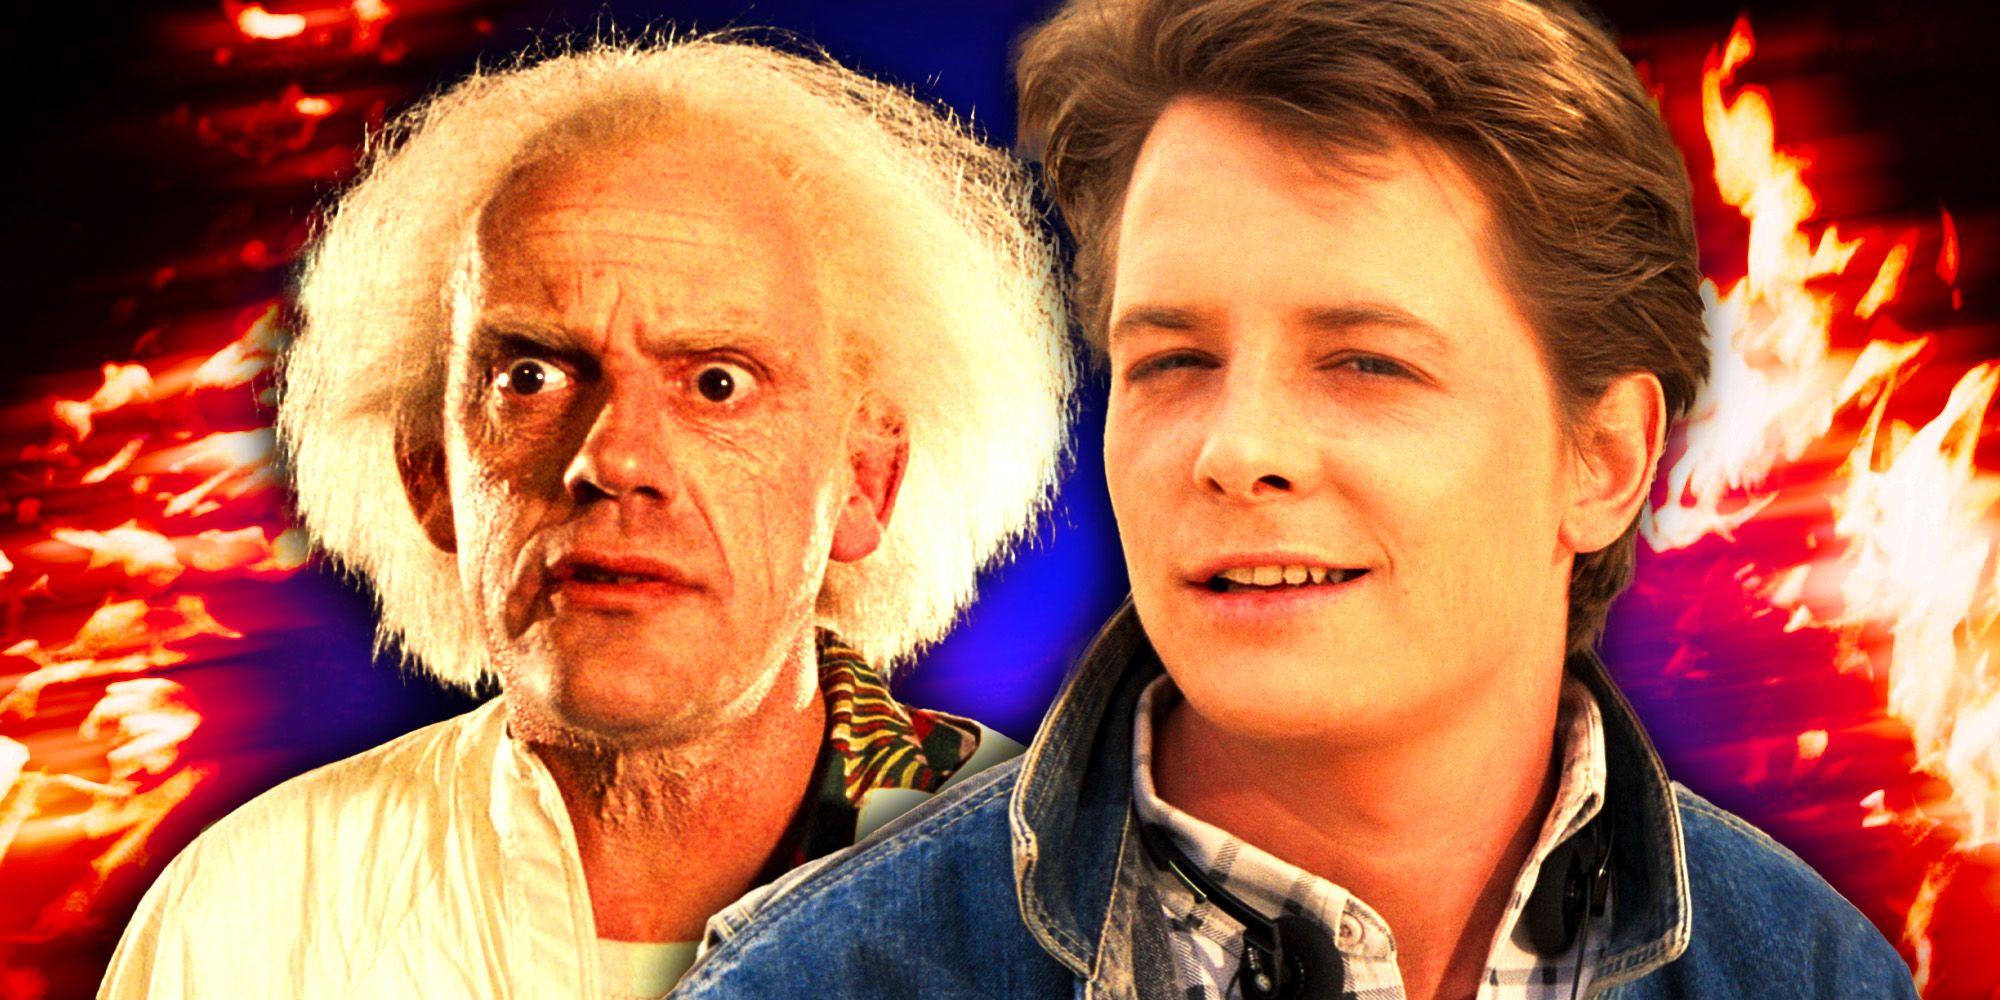 Michael J. Fox as Marty and Christopher Lloyd as Dr. Brown in Back to the Future